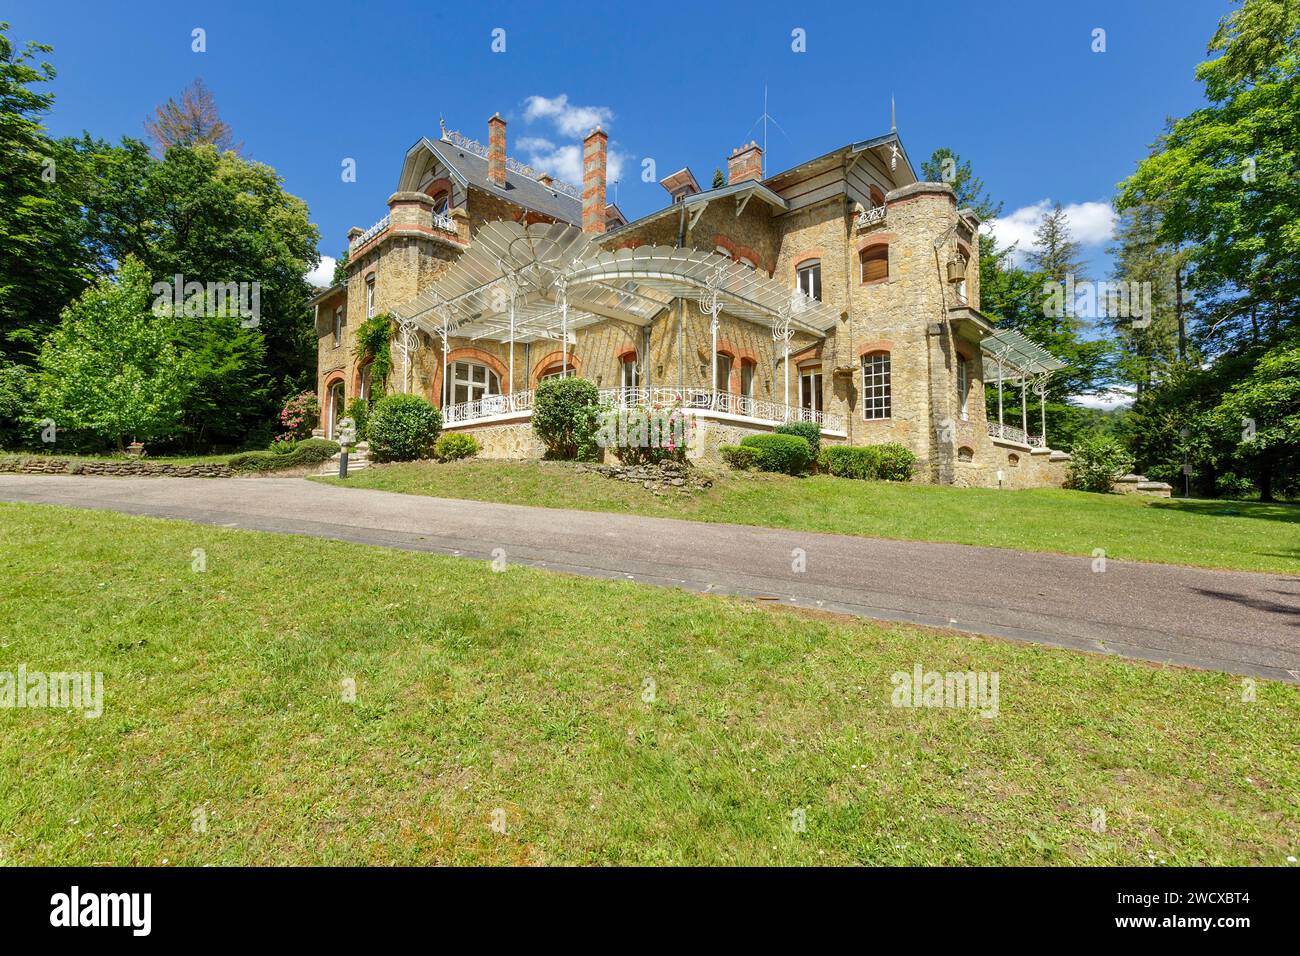 France, Meurthe et Moselle, house in Art Nouveau style called Chateau de la Garenne located in the Eaux Bleues domain which belongs to the Foundation Nicolas Gridel built in 1897 then converted in 1904 by architect Lucien Weissenburger for Antoine Corbin owner of the Magasins Reunis in Nancy Stock Photo